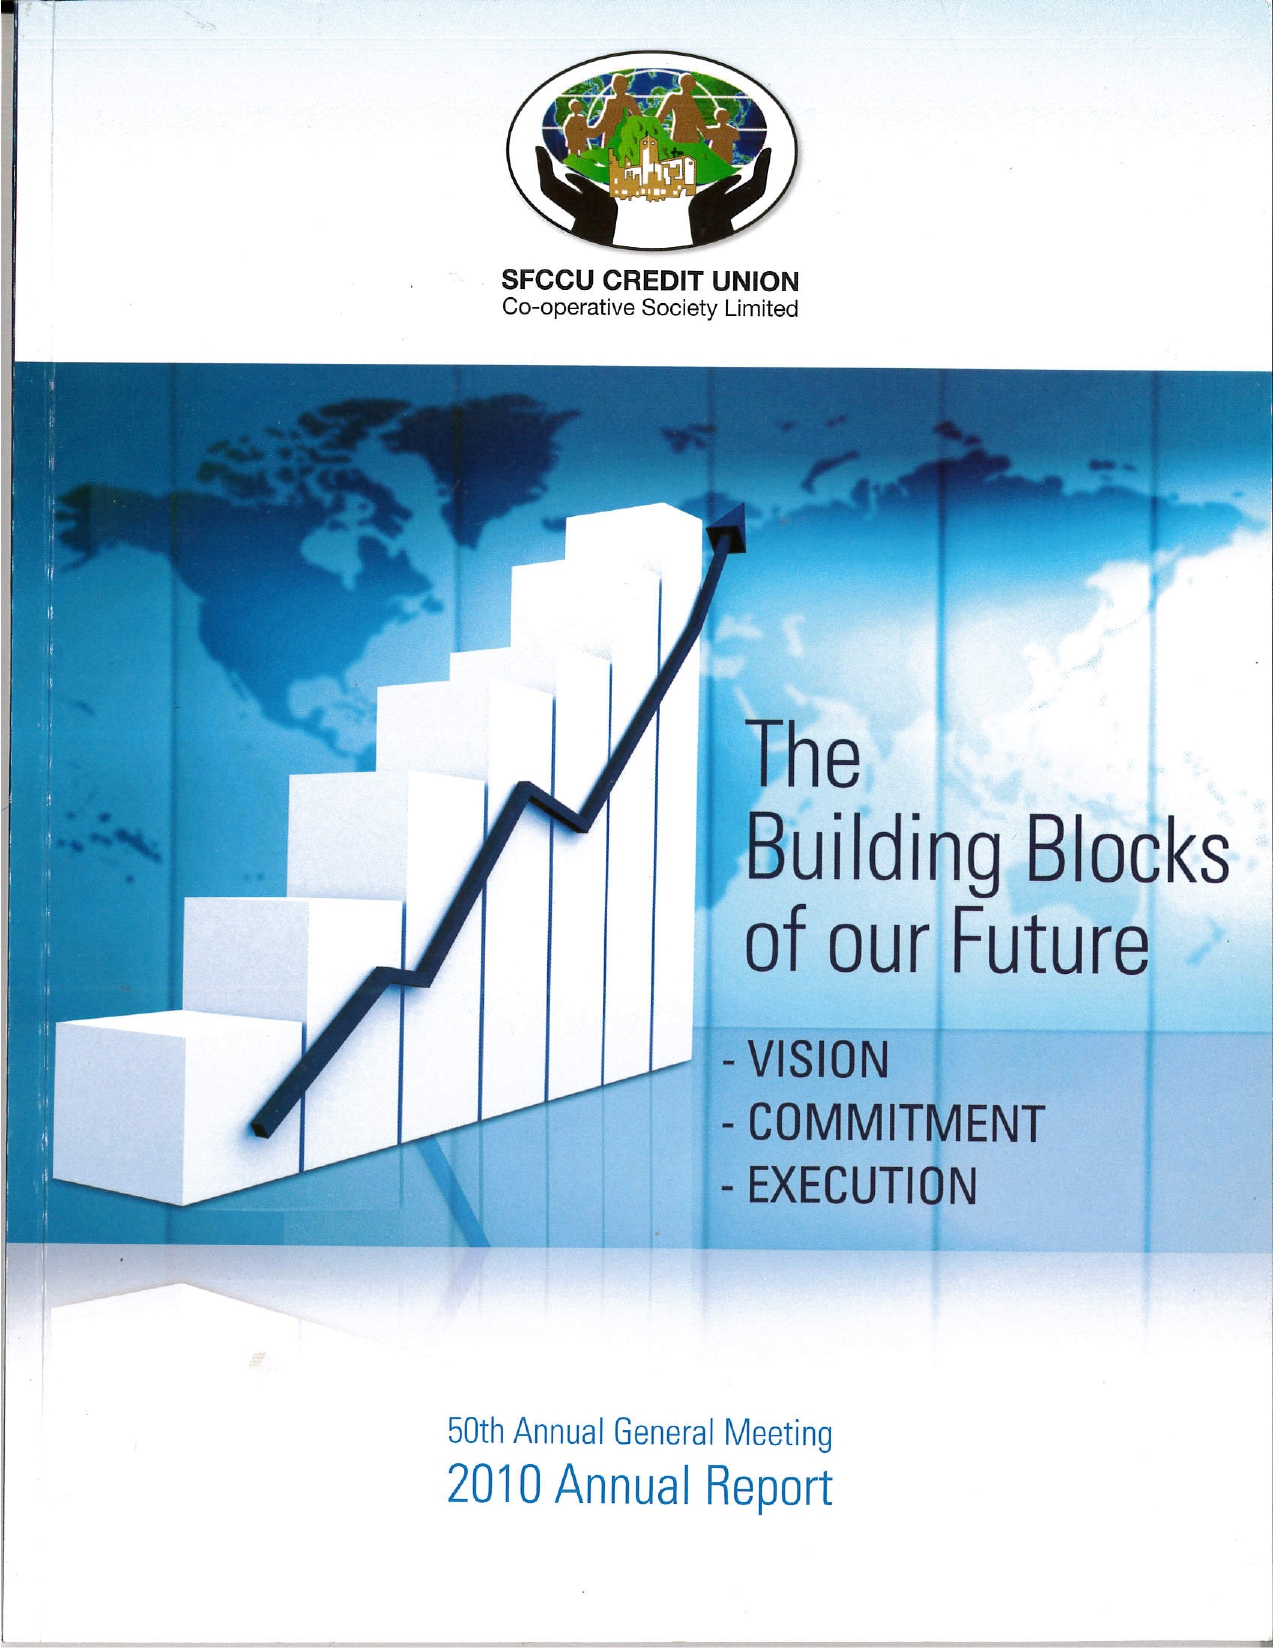 SFCCU Annual Report 2010 Cover_pages-to-jpg-0001